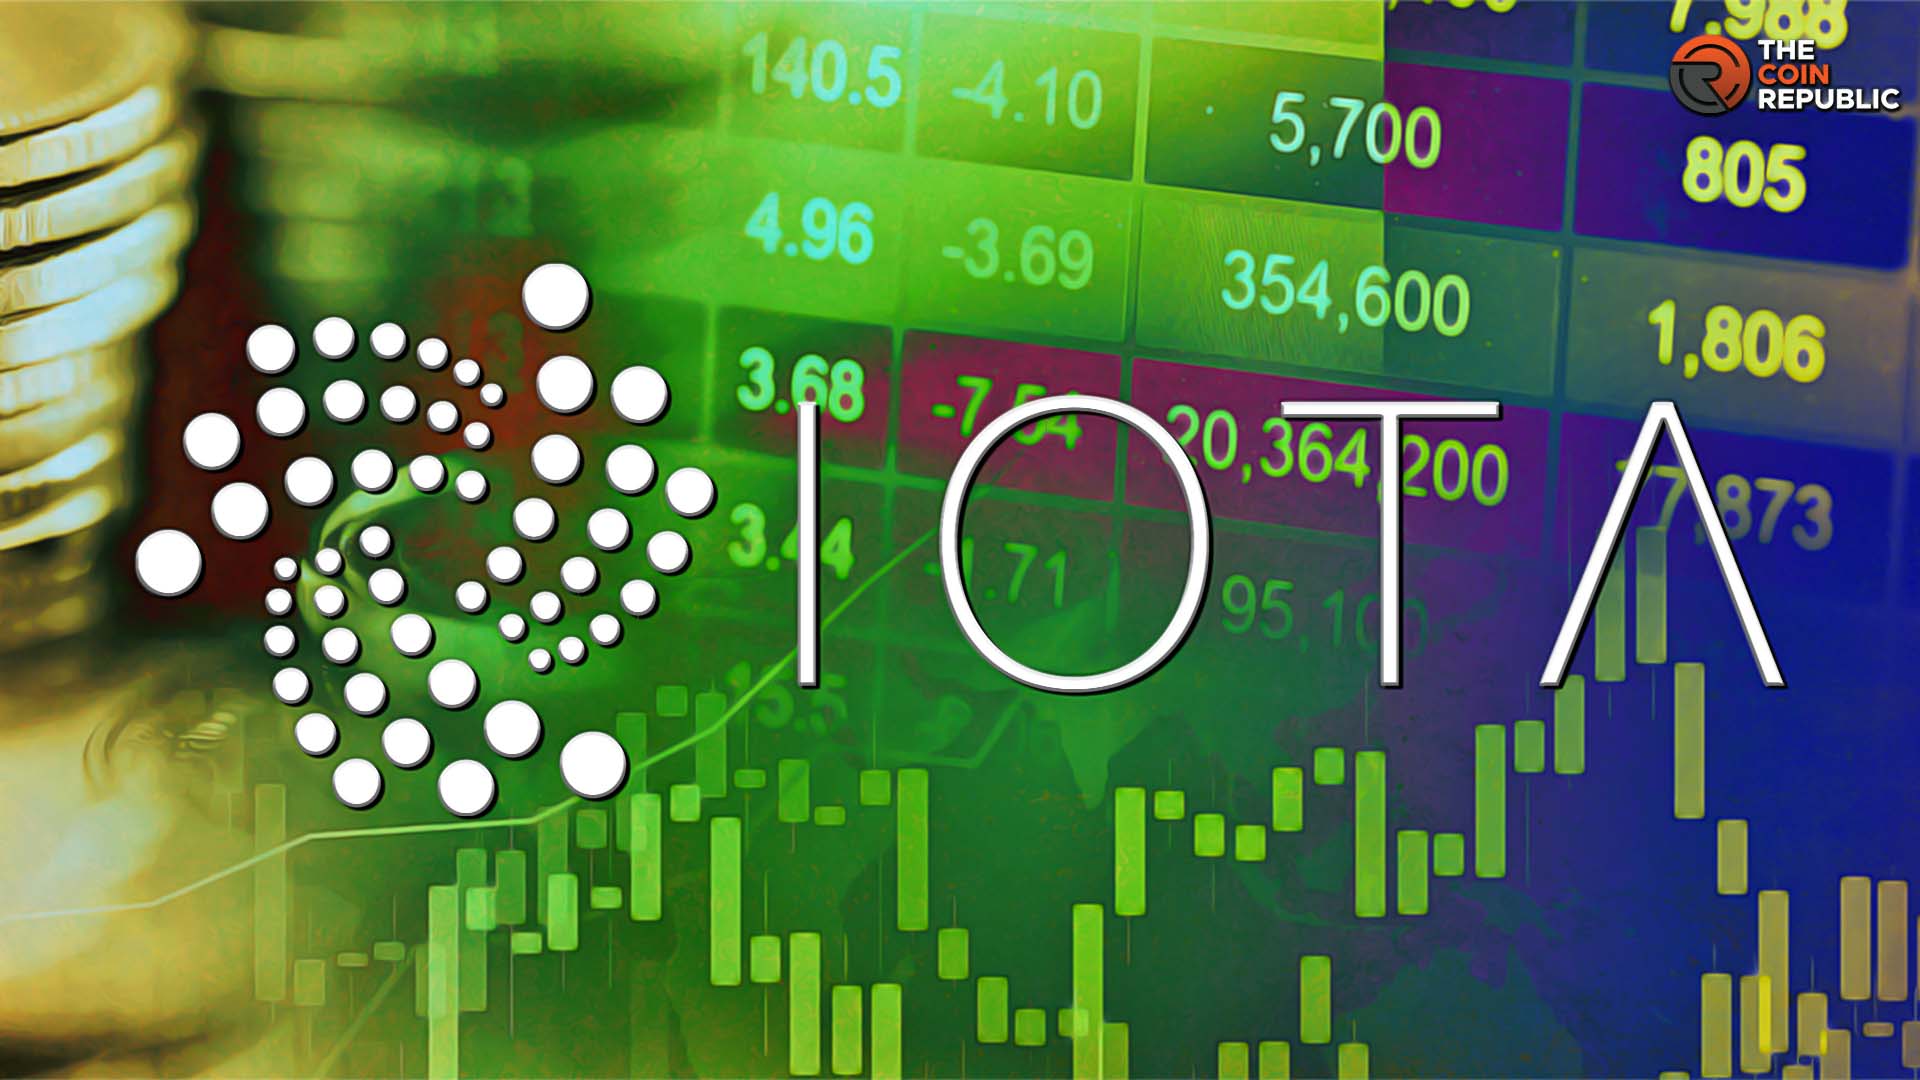 IOTA Crypto Price: Can It Rise Higher Or Slump Down to Lows?